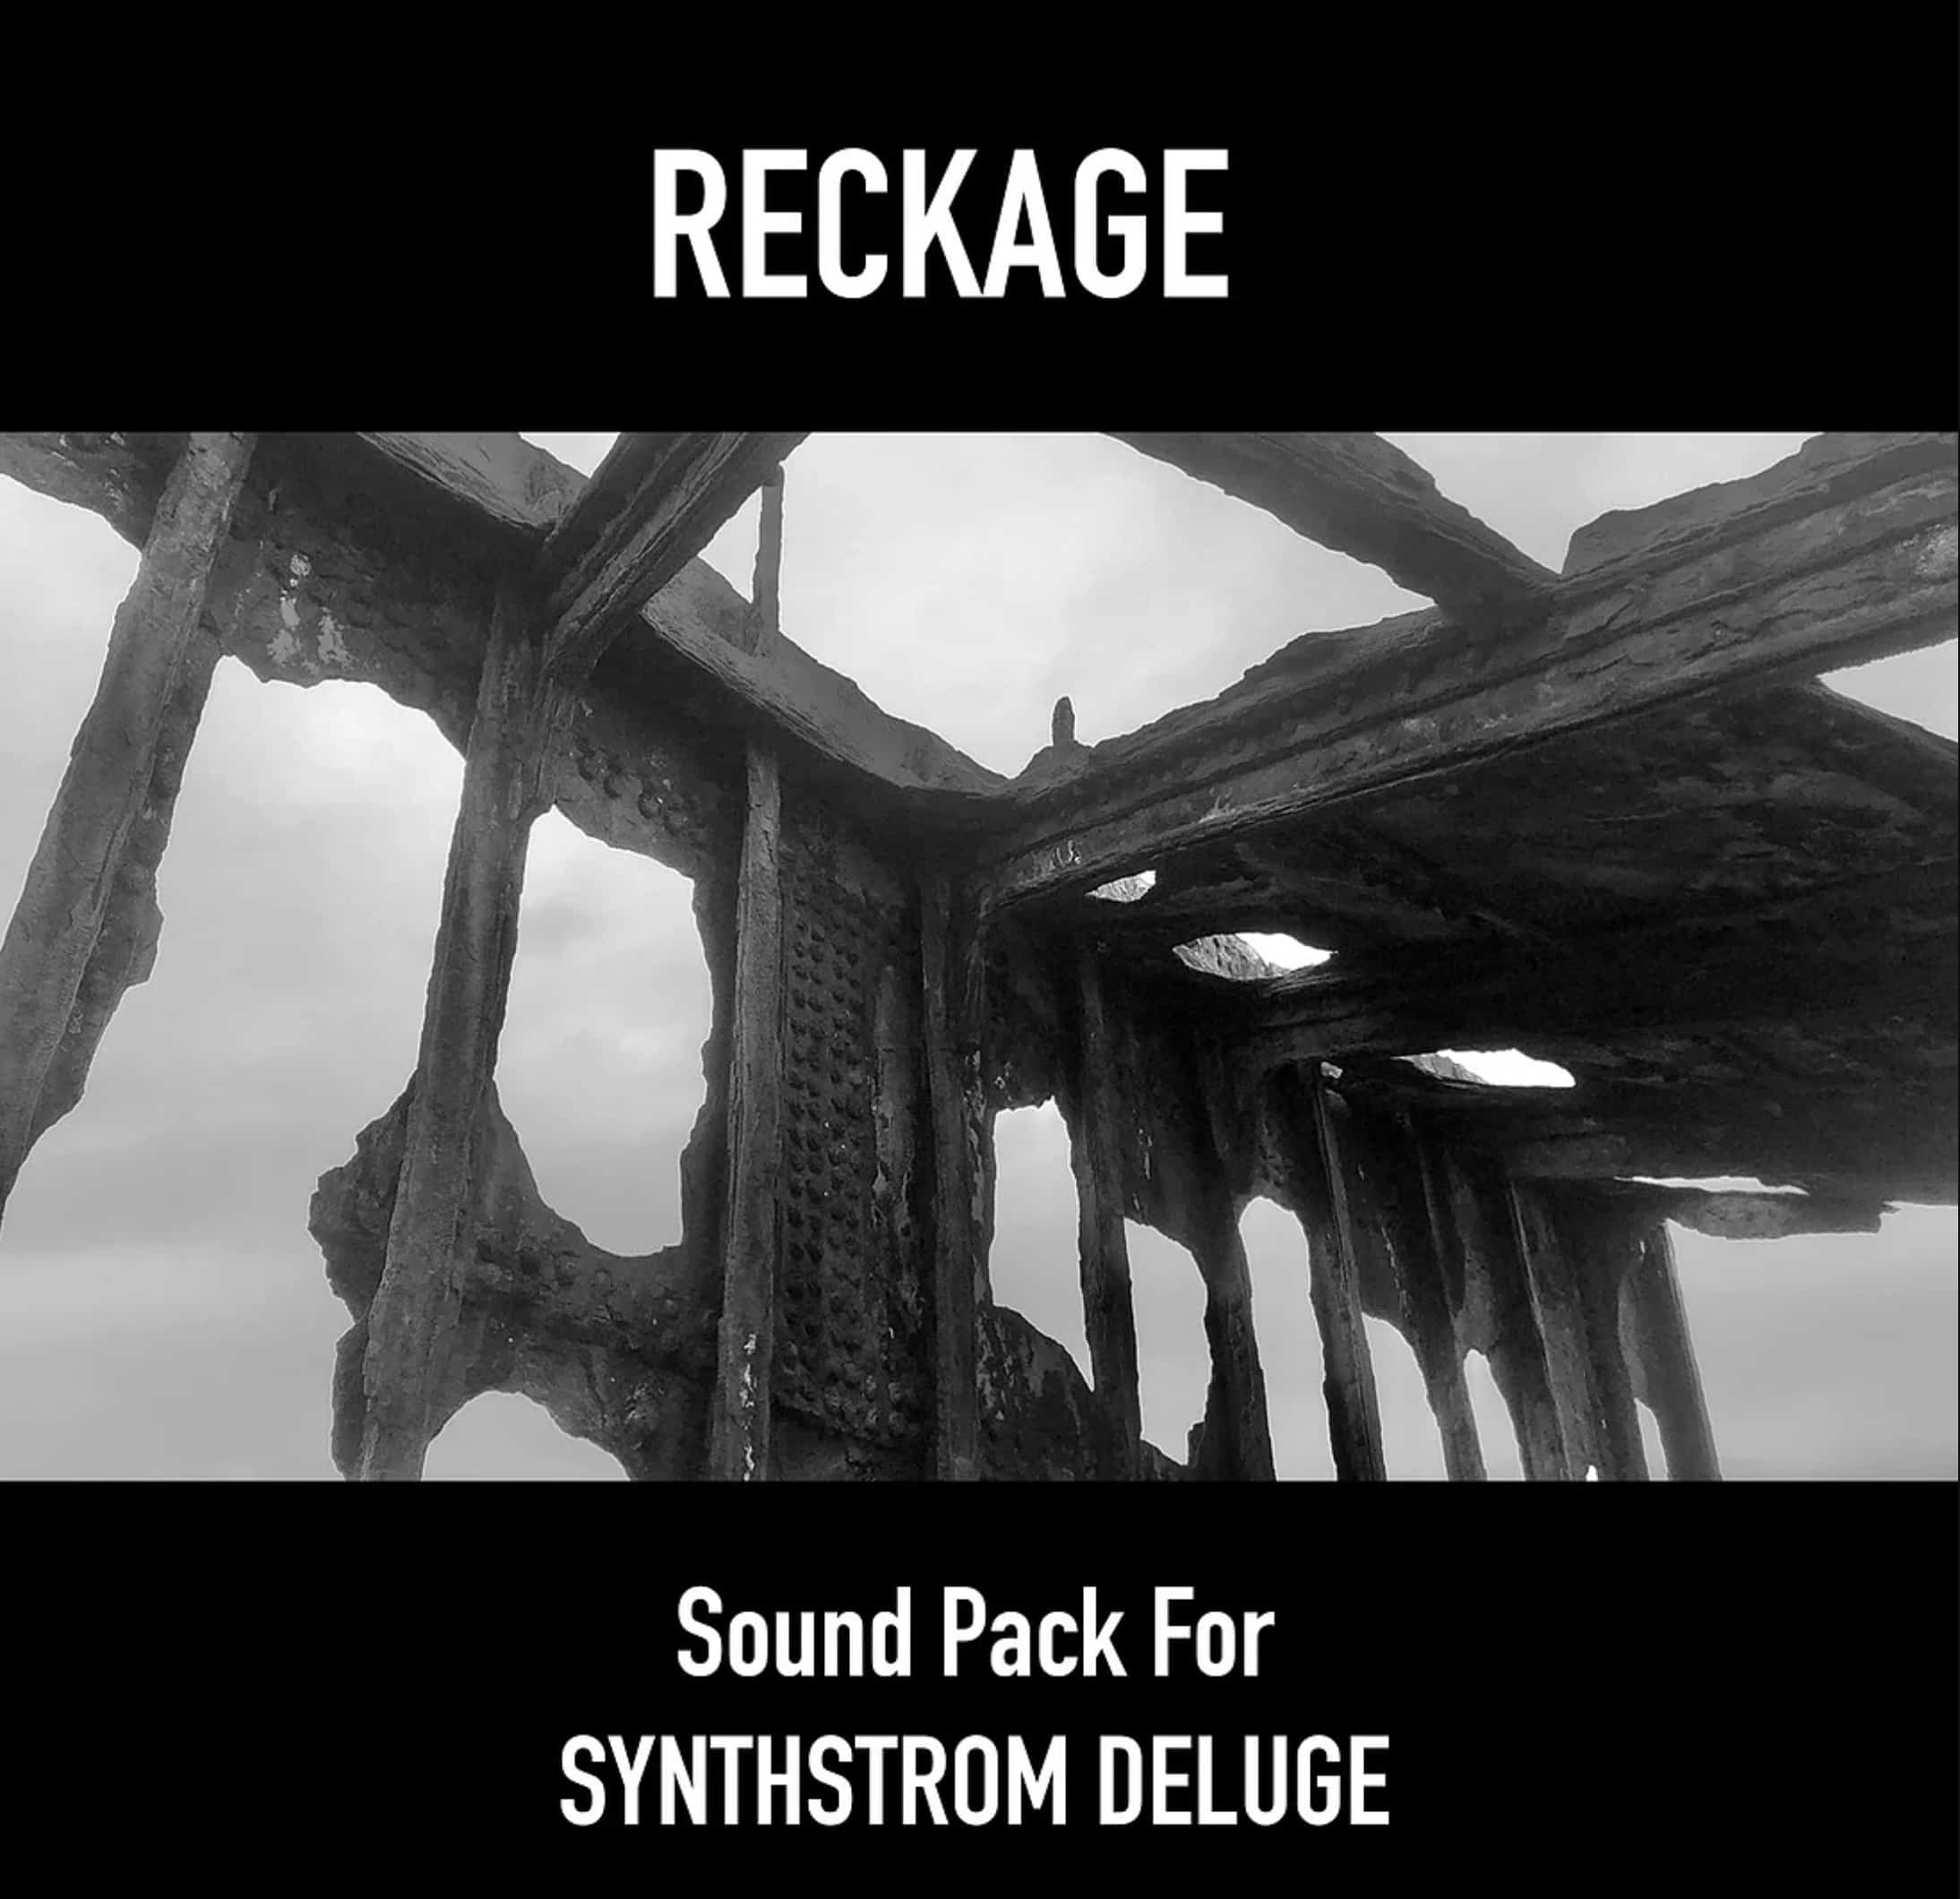 22Reckage22 Dark Ambient Sound Pack for Synthstrom Deluge